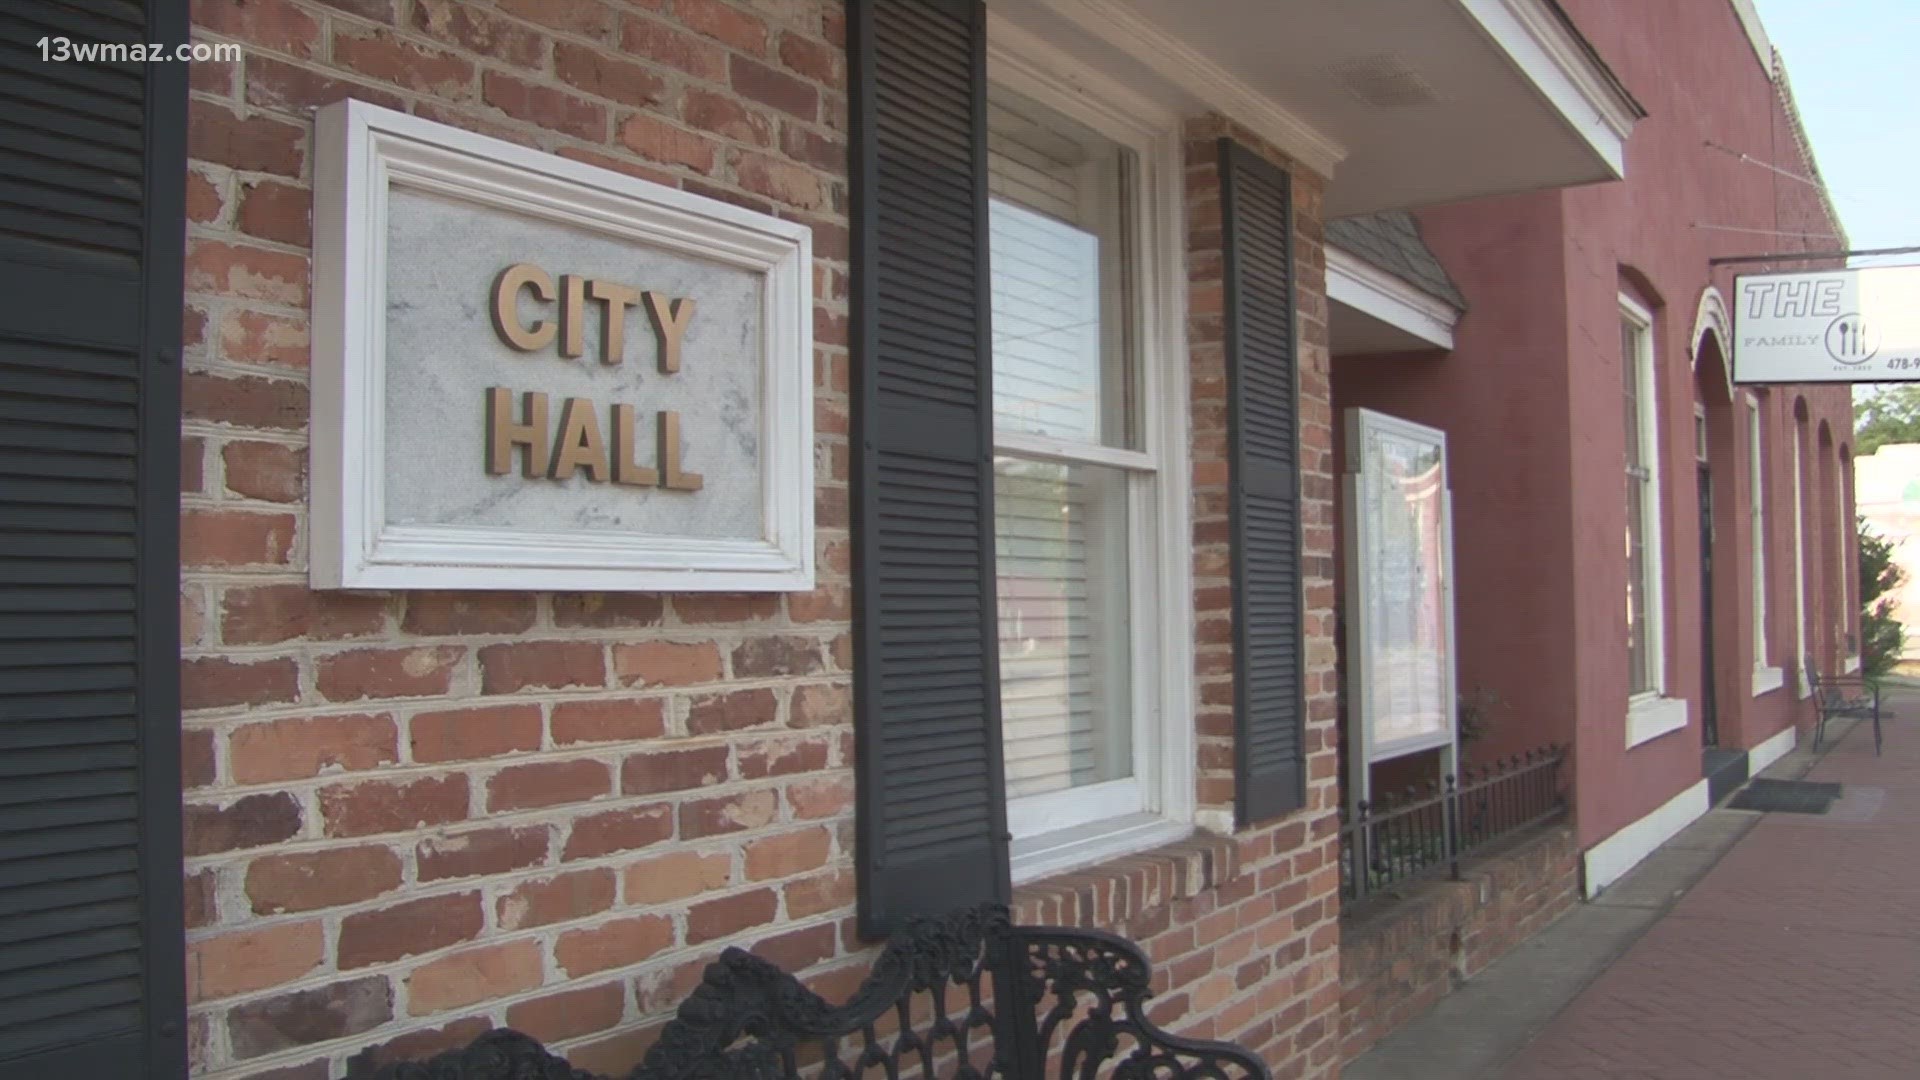 Some members of the city's budget committee say the problem is with the mayor's spending habits.